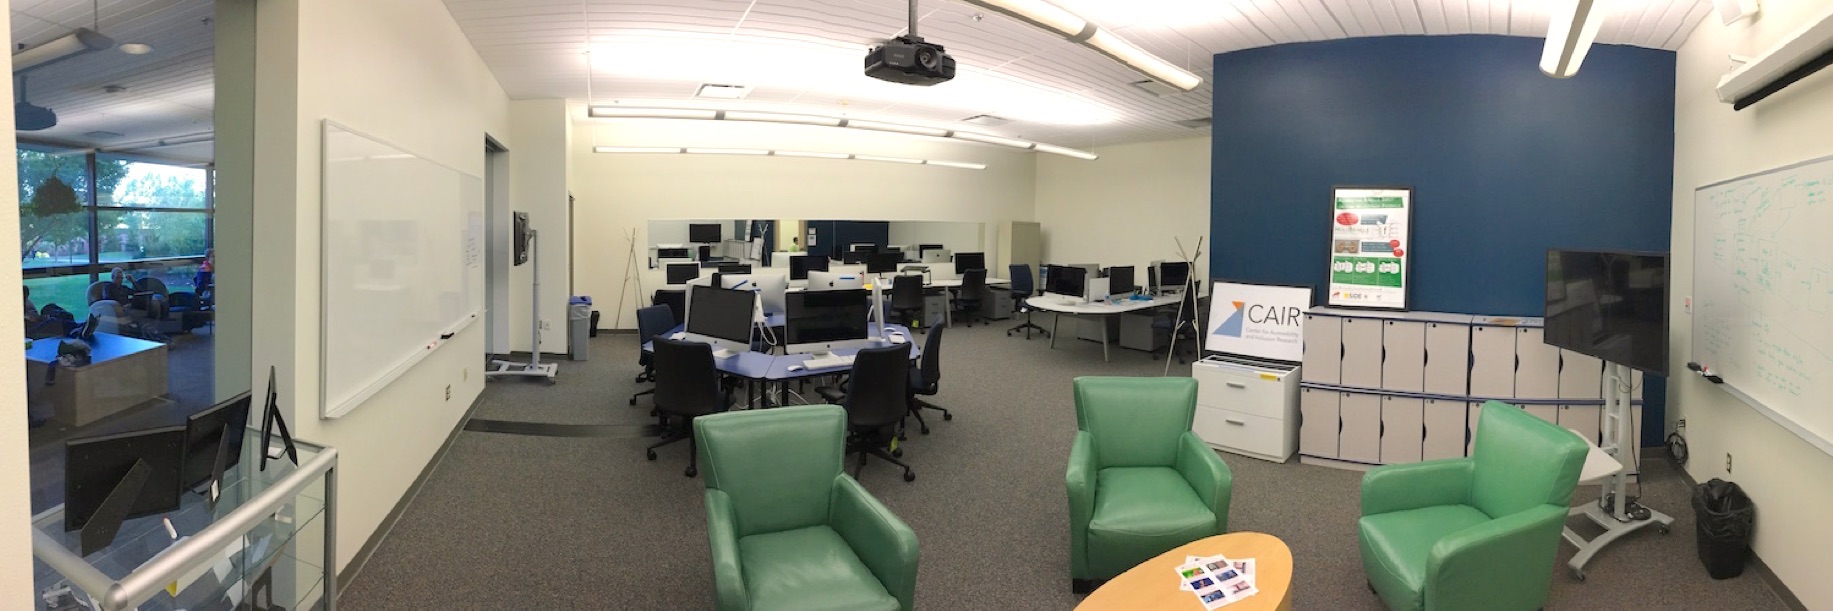 Panoramic photo of the interior of CAIR.